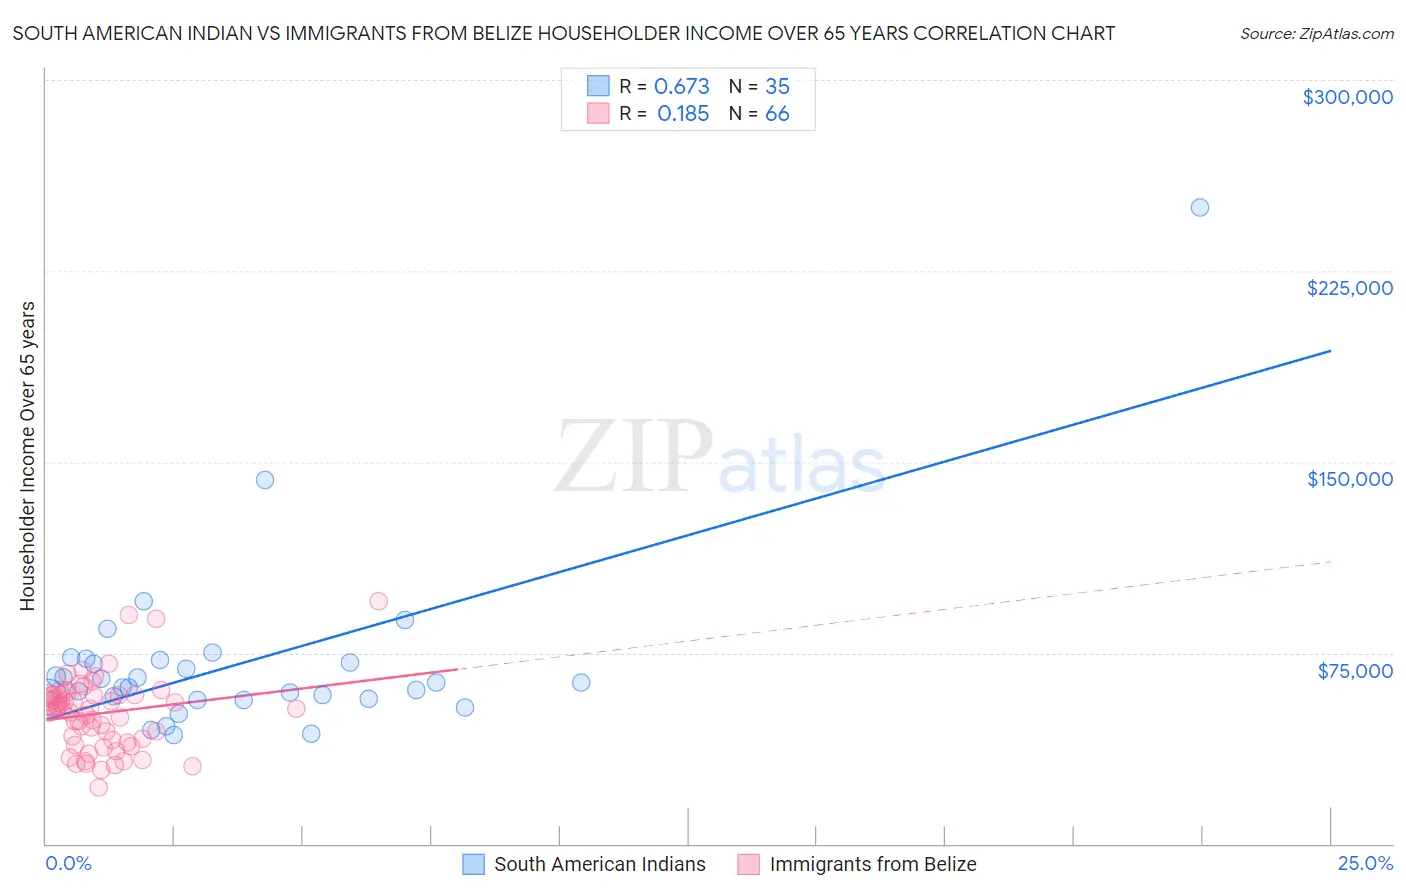 South American Indian vs Immigrants from Belize Householder Income Over 65 years